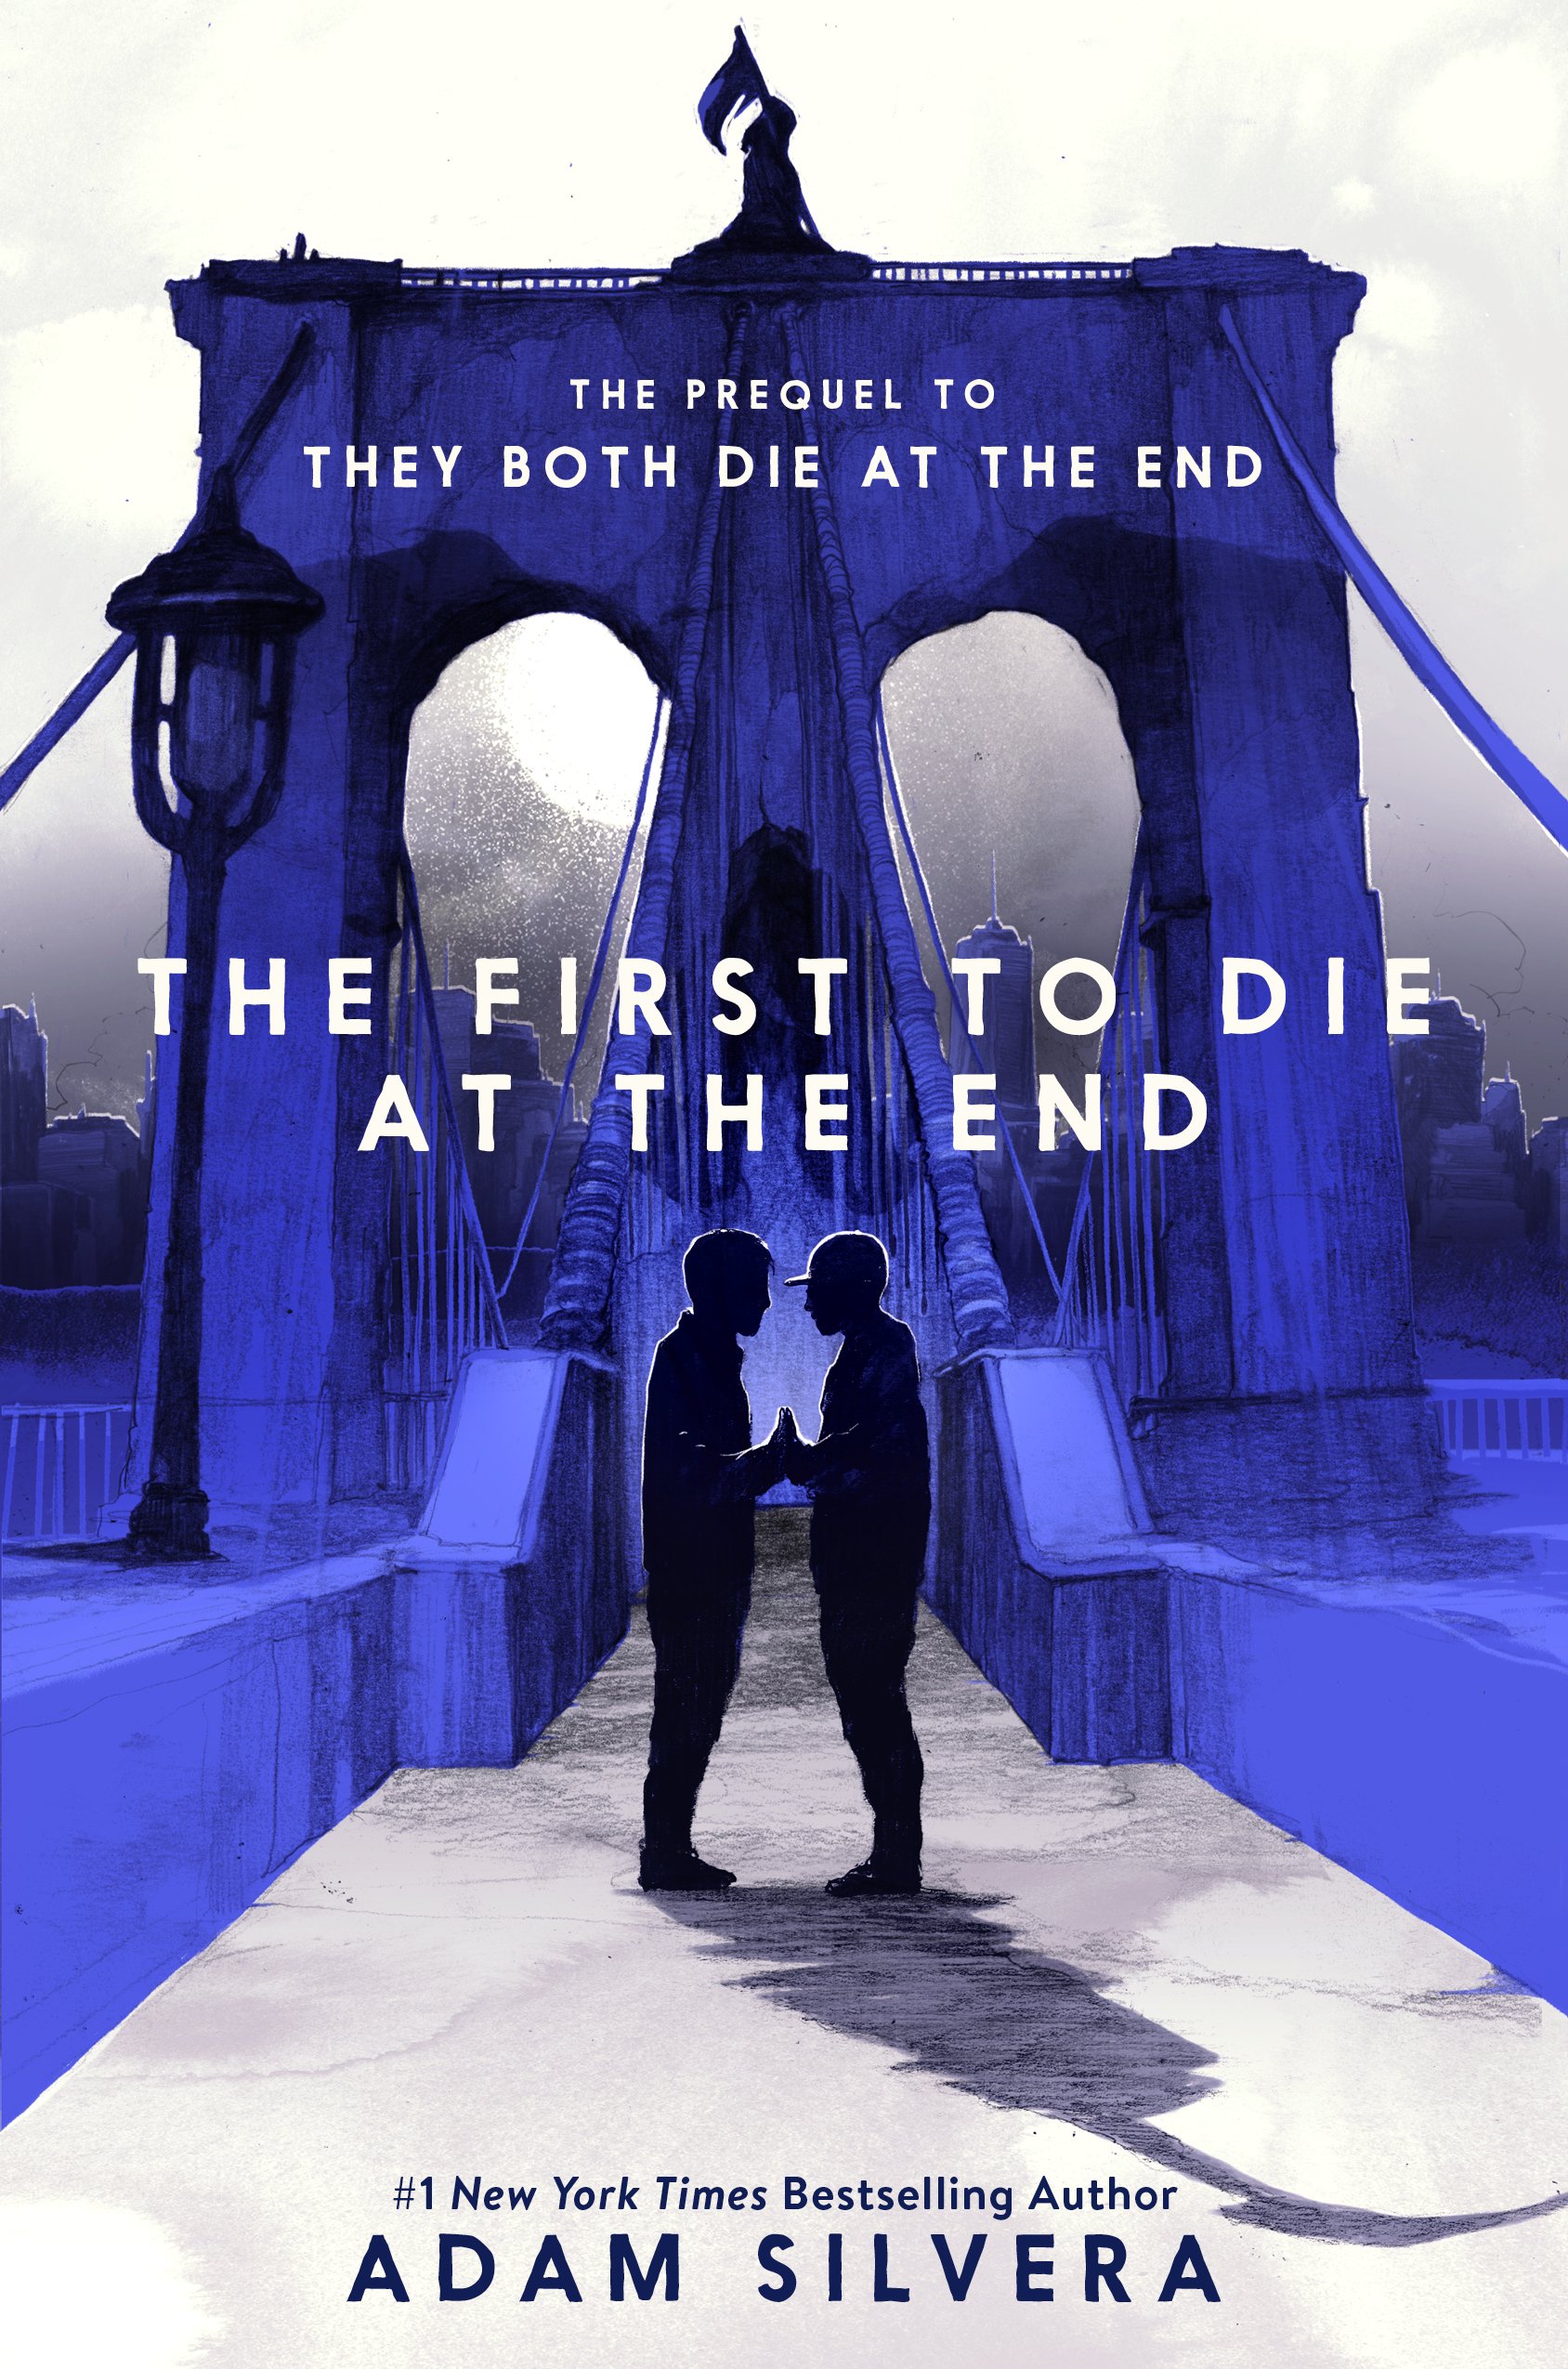 THE FIRST TO DIE AT THE END — ADAM SILVERA